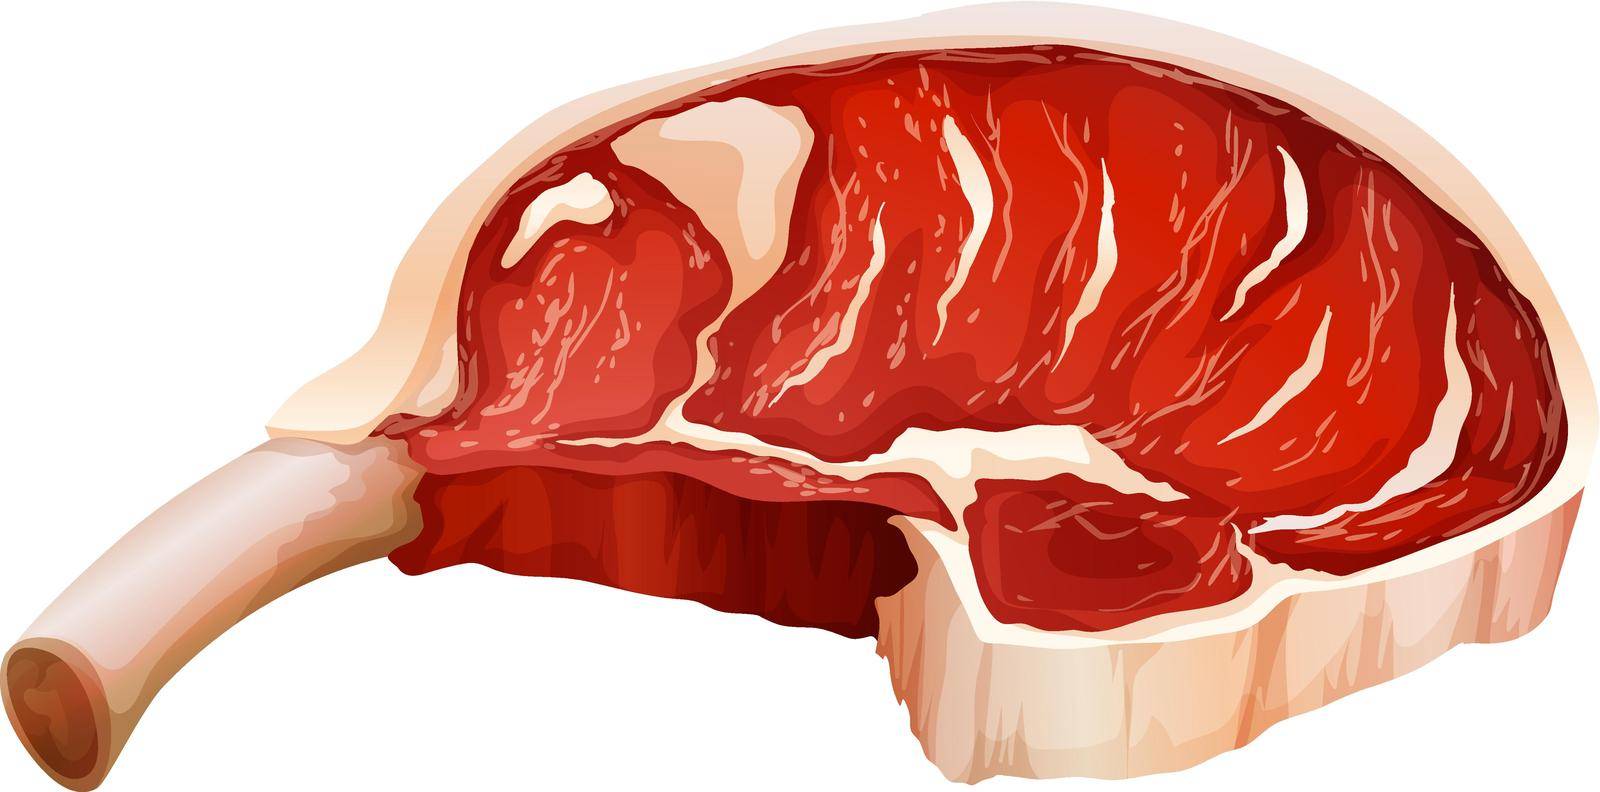 Piece of an uncooked beef meat